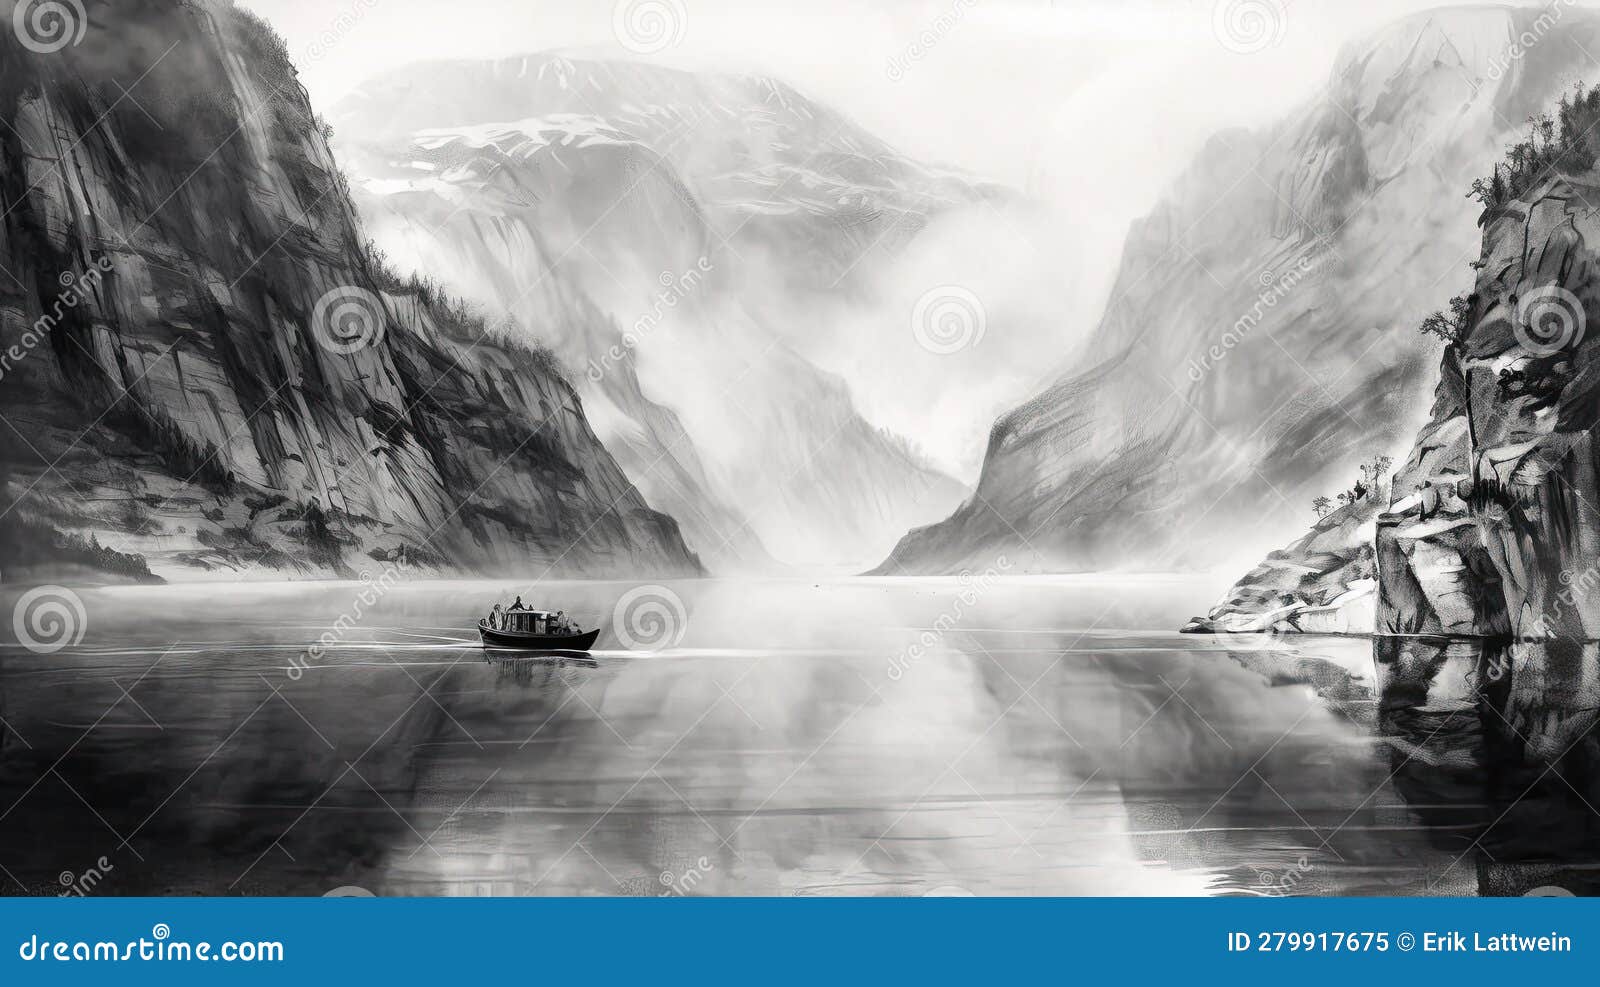 Norwegian Fjords Black And White Abstract Fantasy Picture Stock  Illustration - Download Image Now - iStock